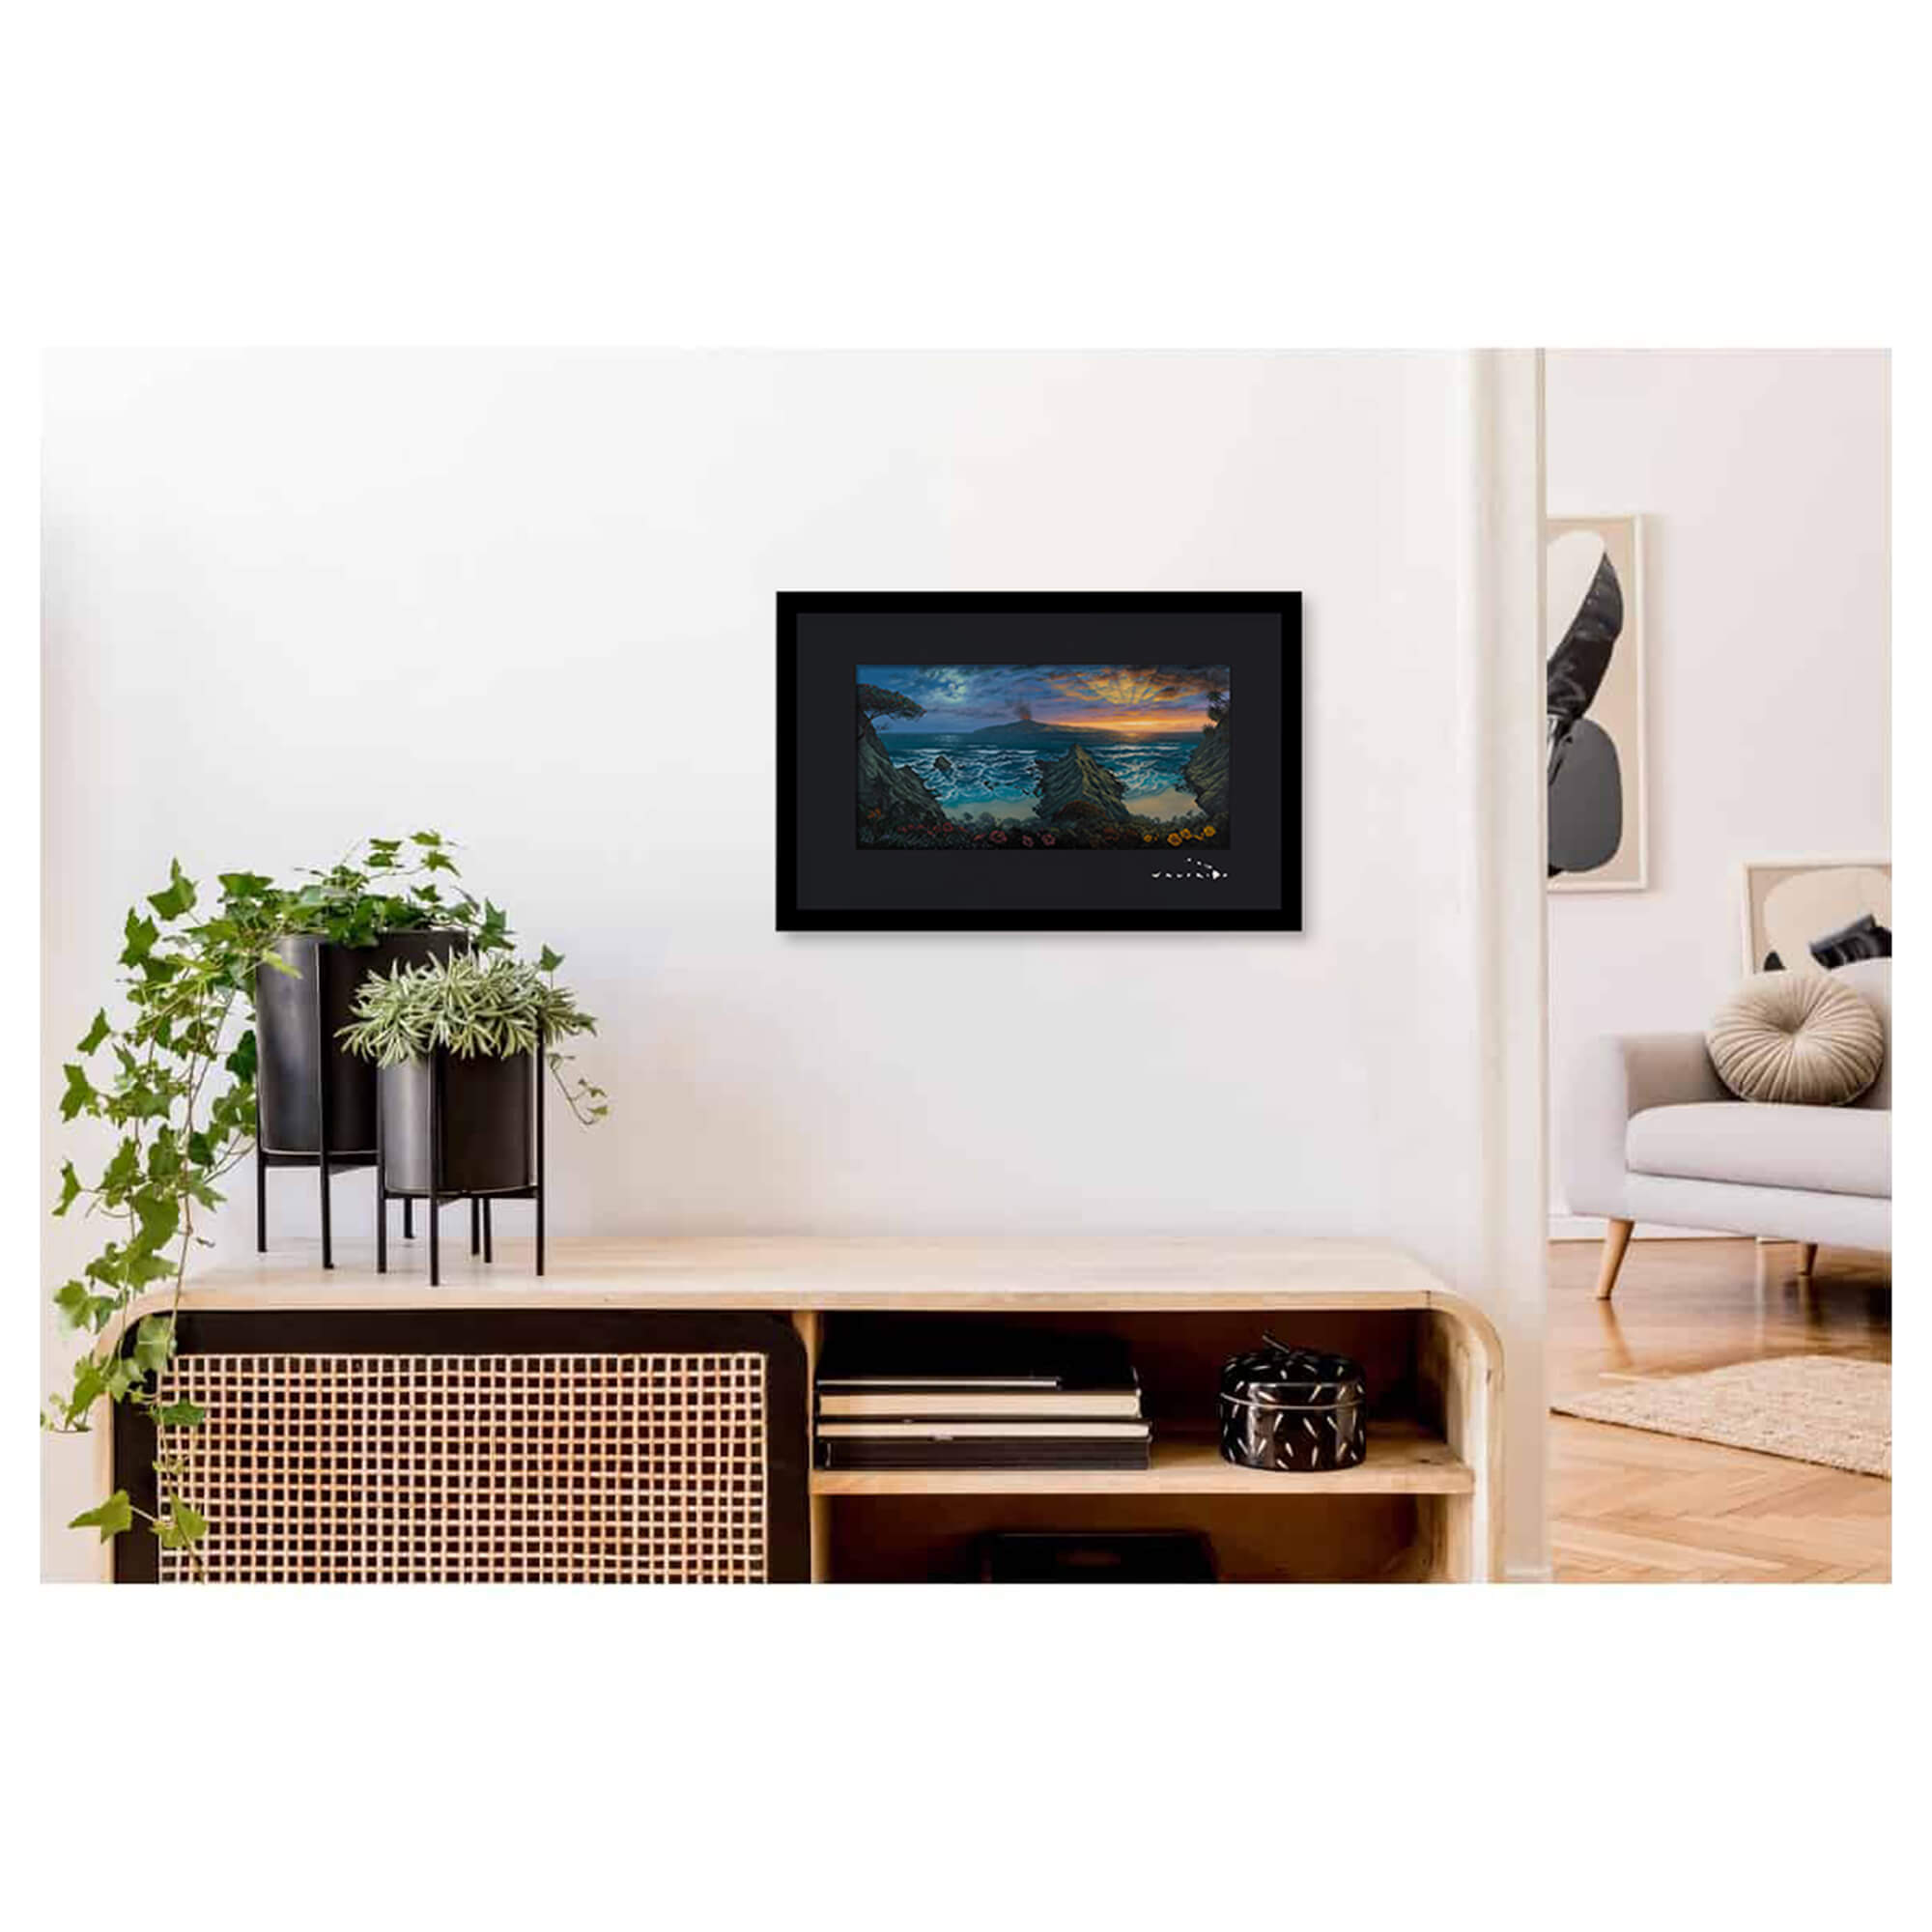 Framed matted art print of a tropical seascape with a volcano erupting on a distant island by Hawaii artist Walfrido Garcia